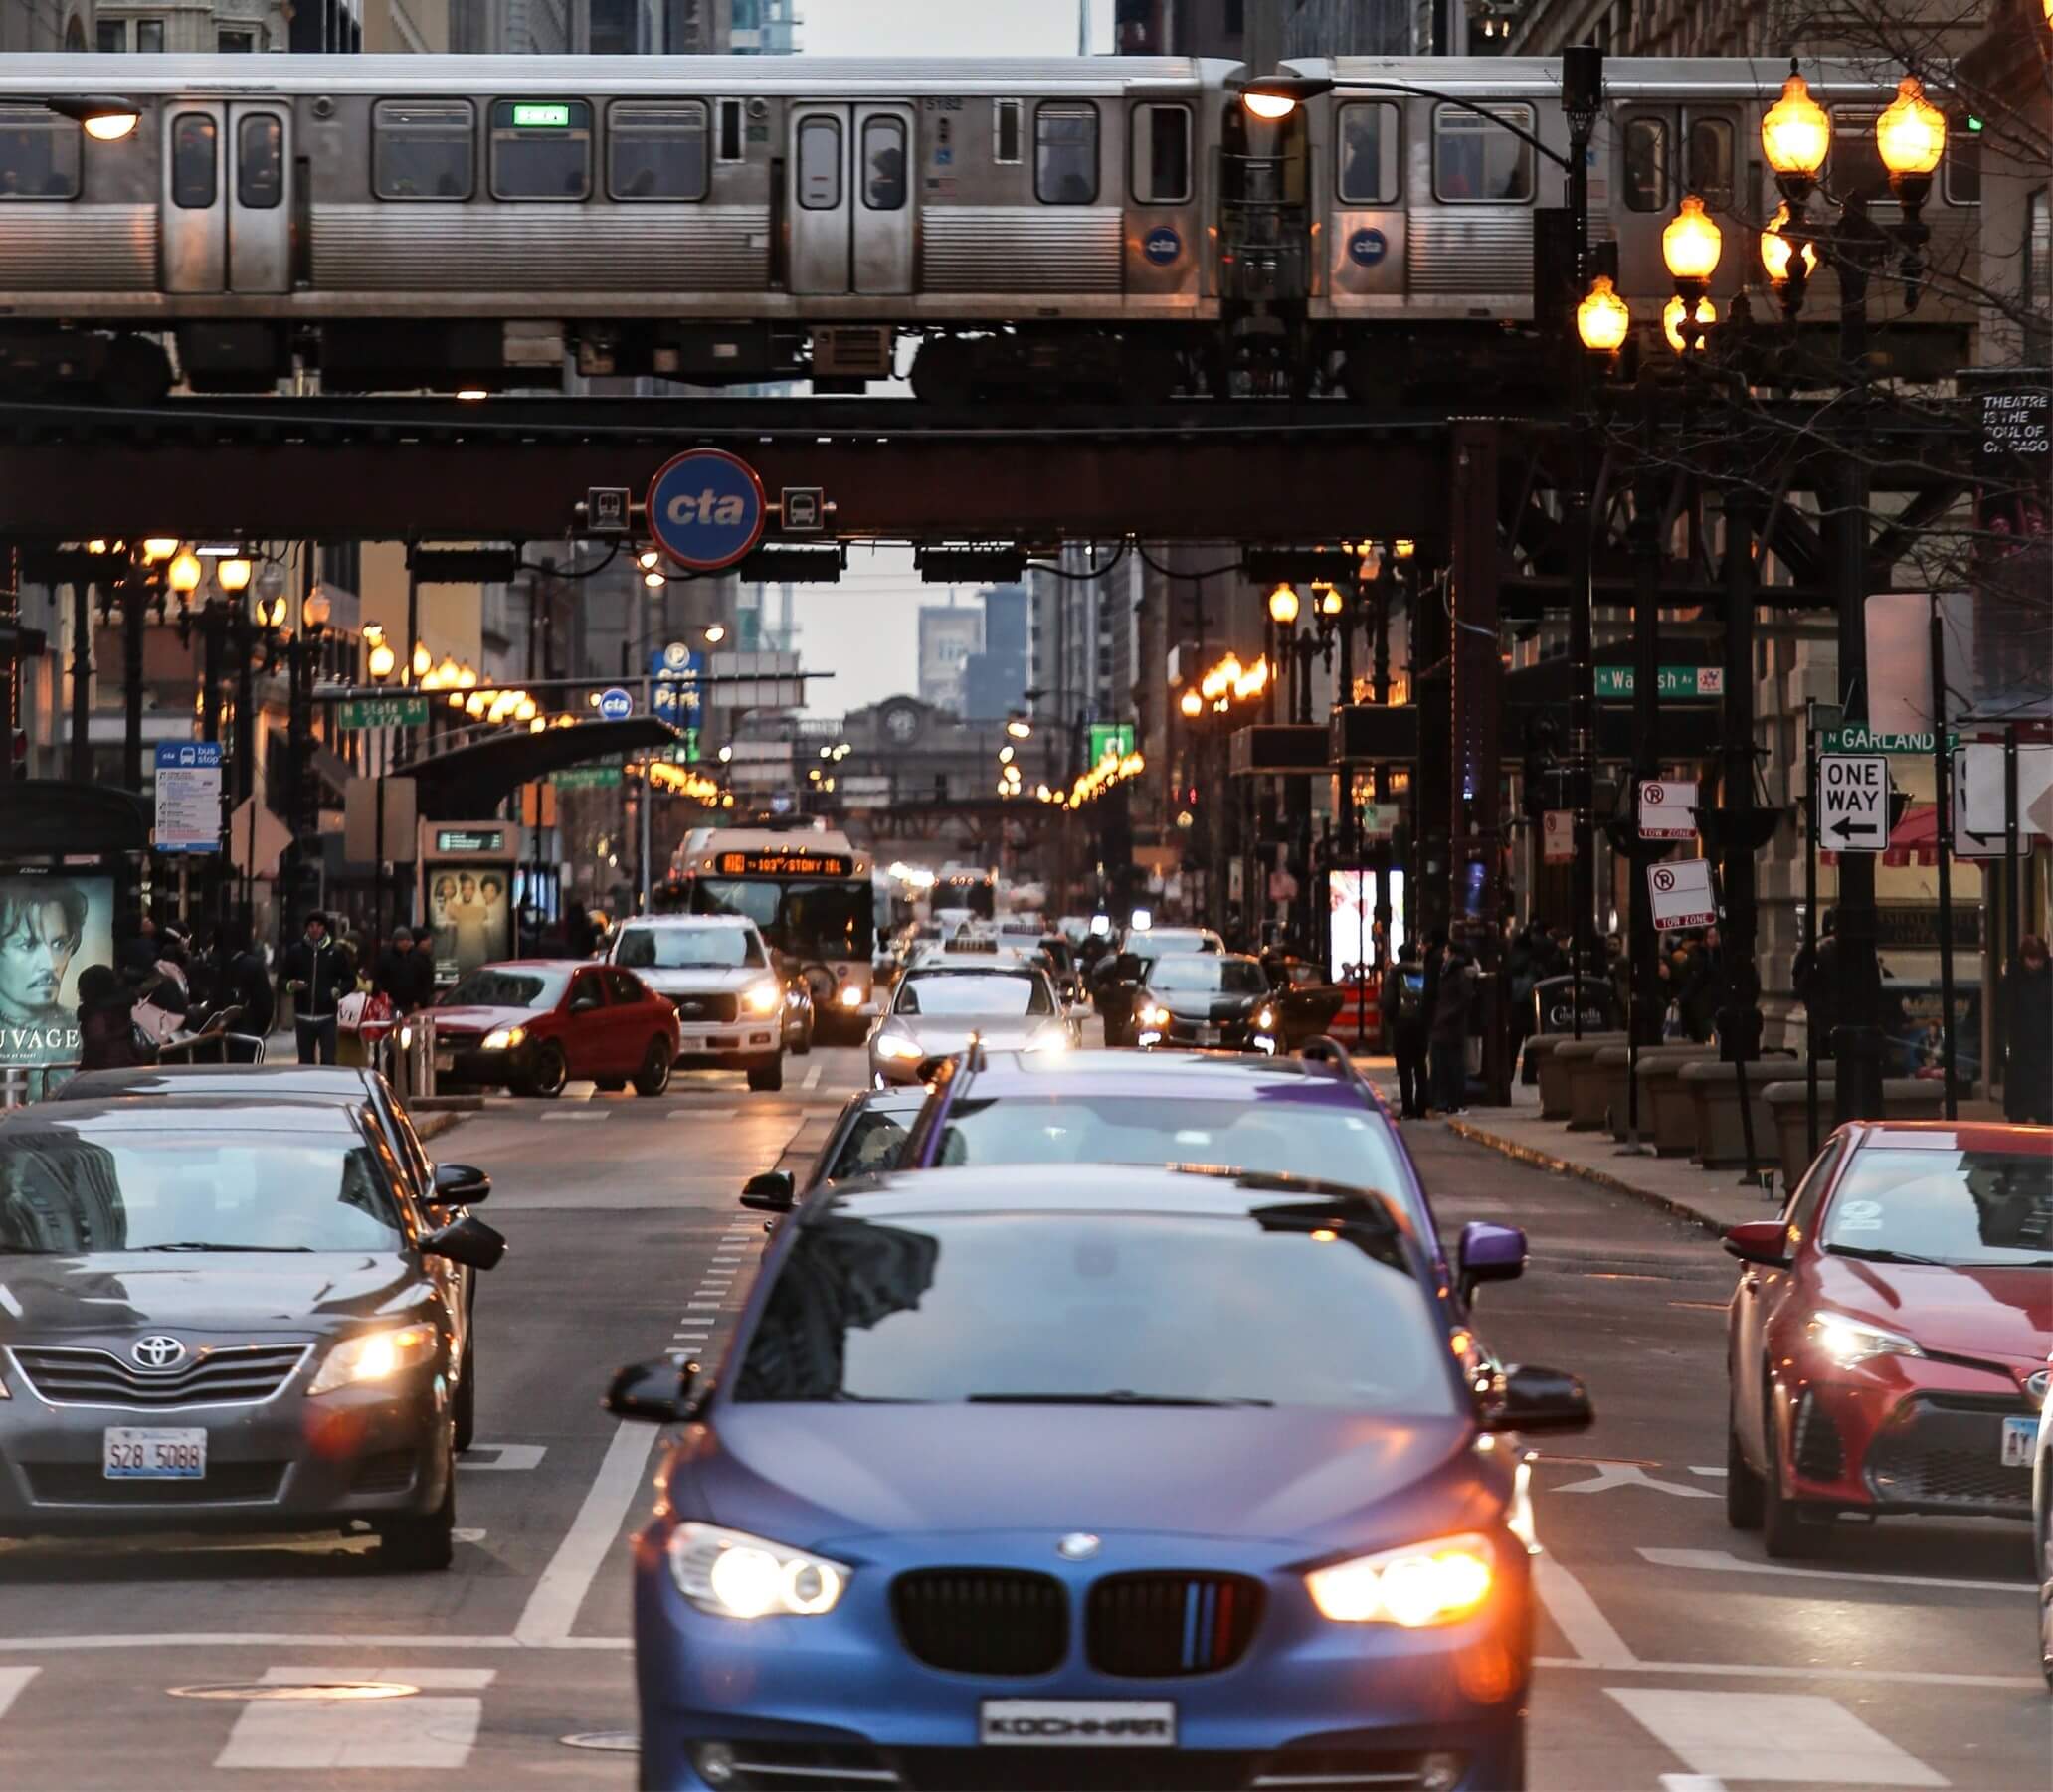 Cars in a busy urban scene with subway train running across the middle of the image.